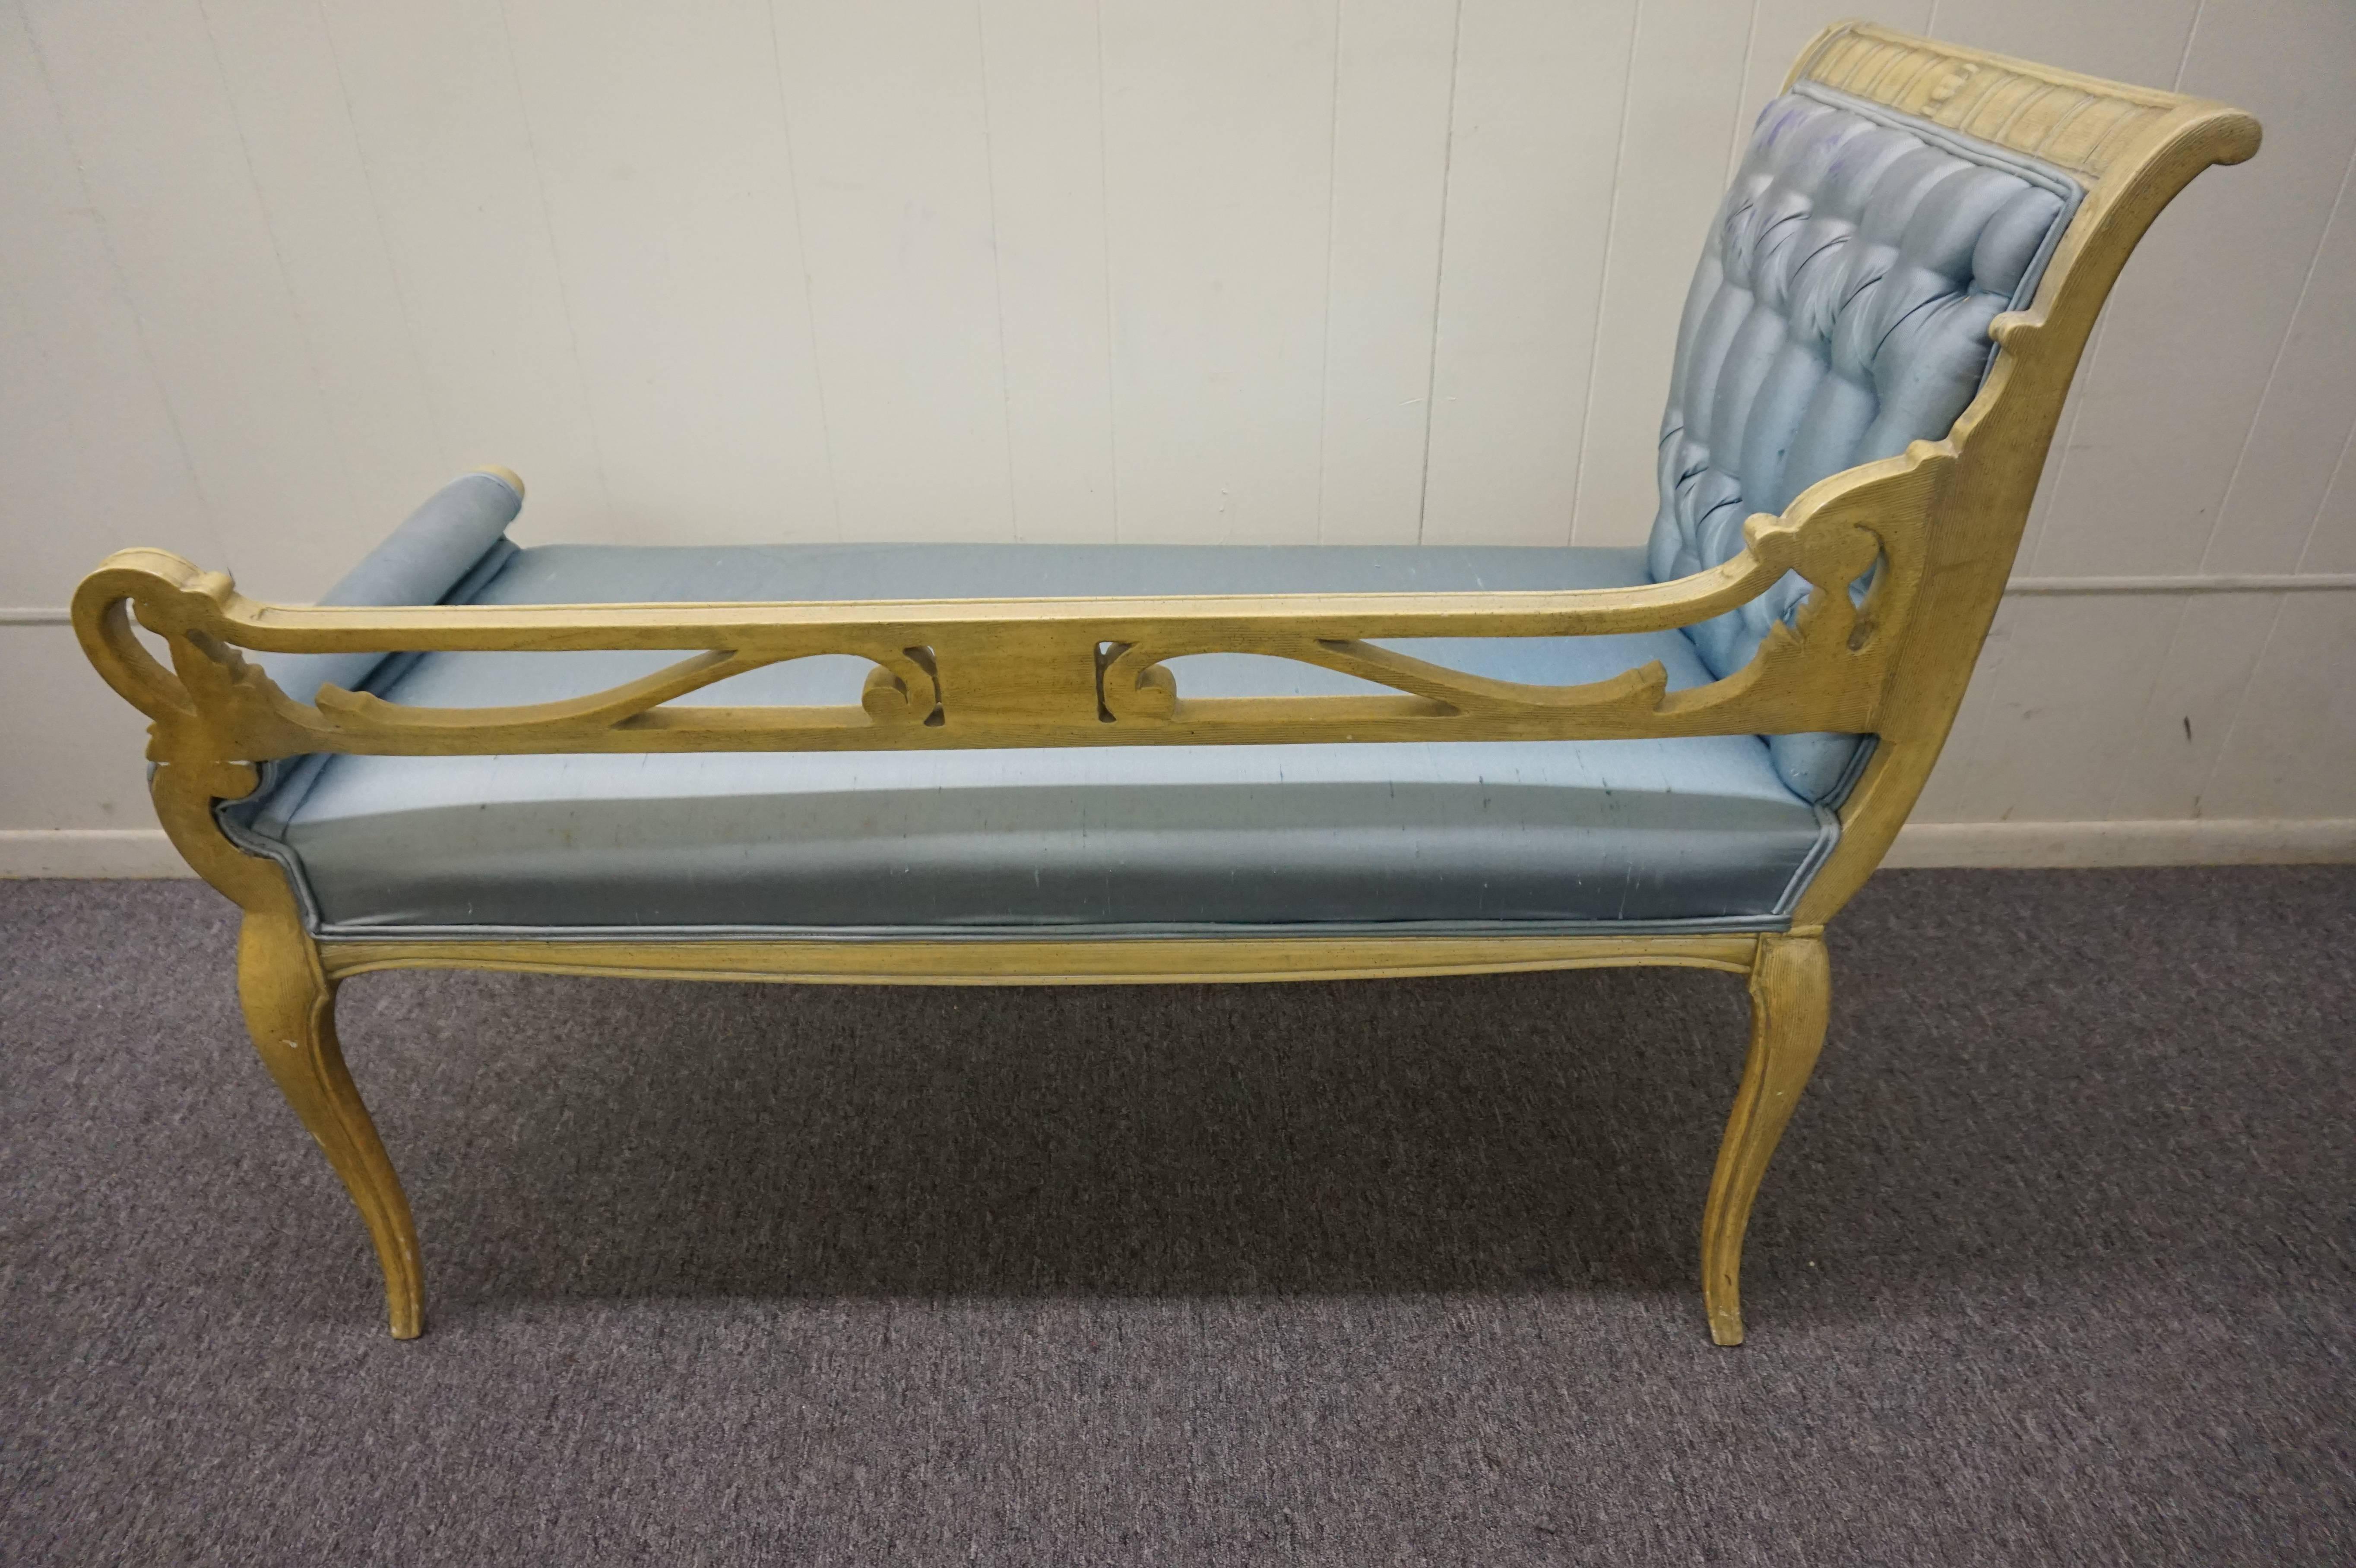 Lovely Hollywood Regency scrolled arm carved wood bench. Gorgeous cabriolet legs with one tall tufted scrolled arm. The blue satin fabric has seen better days but that means it just right for you designers who need to have everything reupholstered